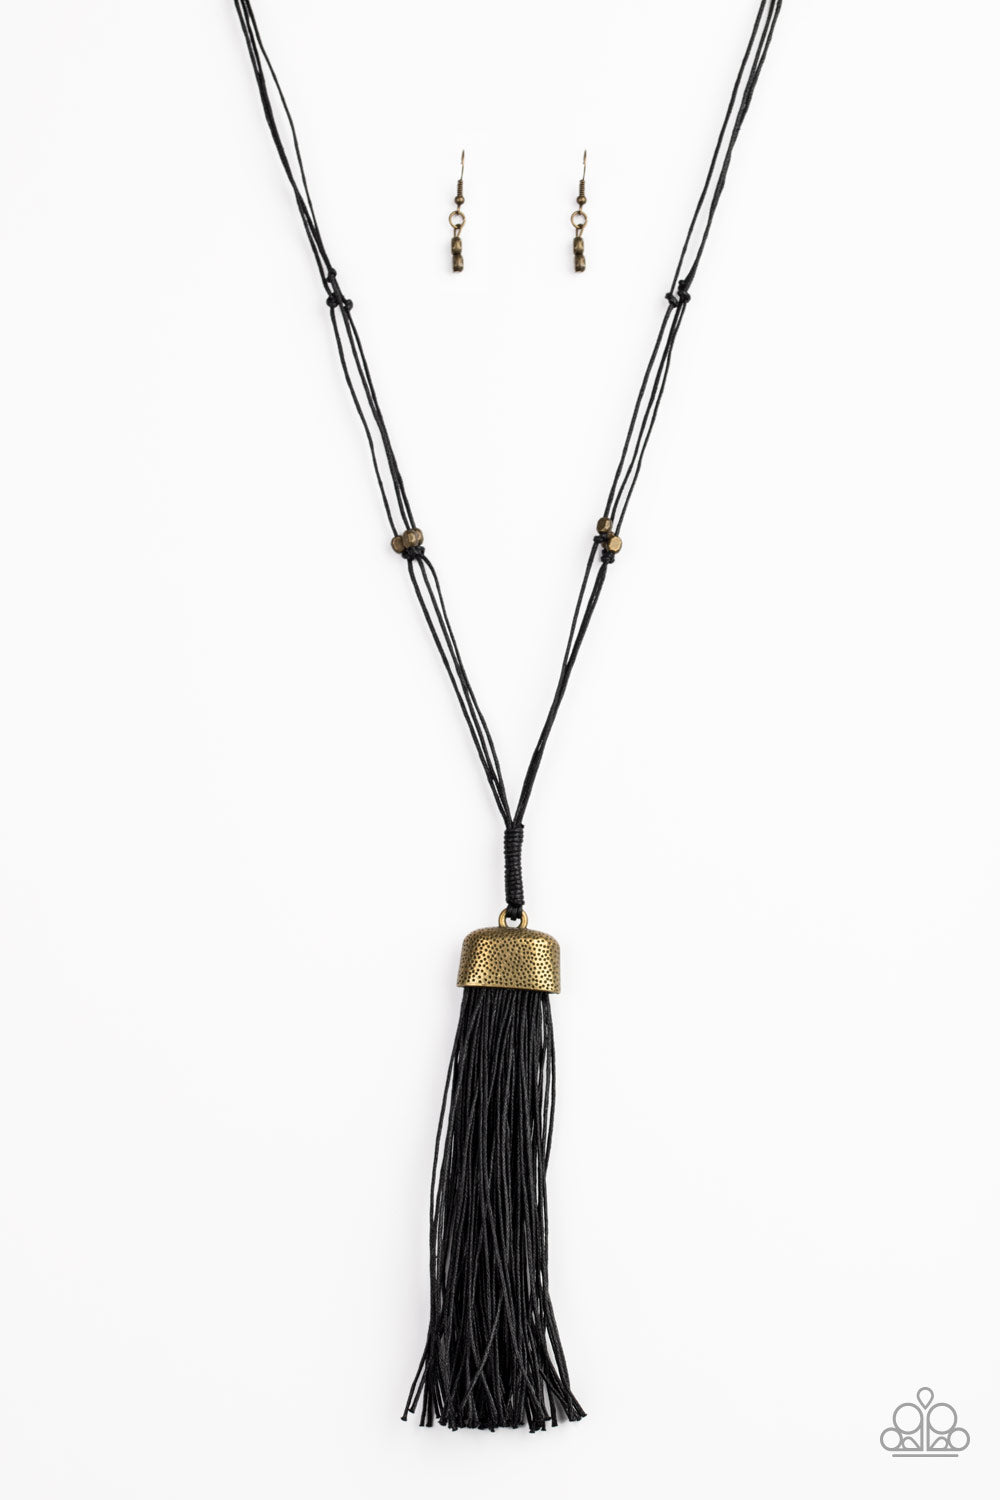 Paparazzi Accessories Brush it Off - Brass Necklaces - Lady T Accessories